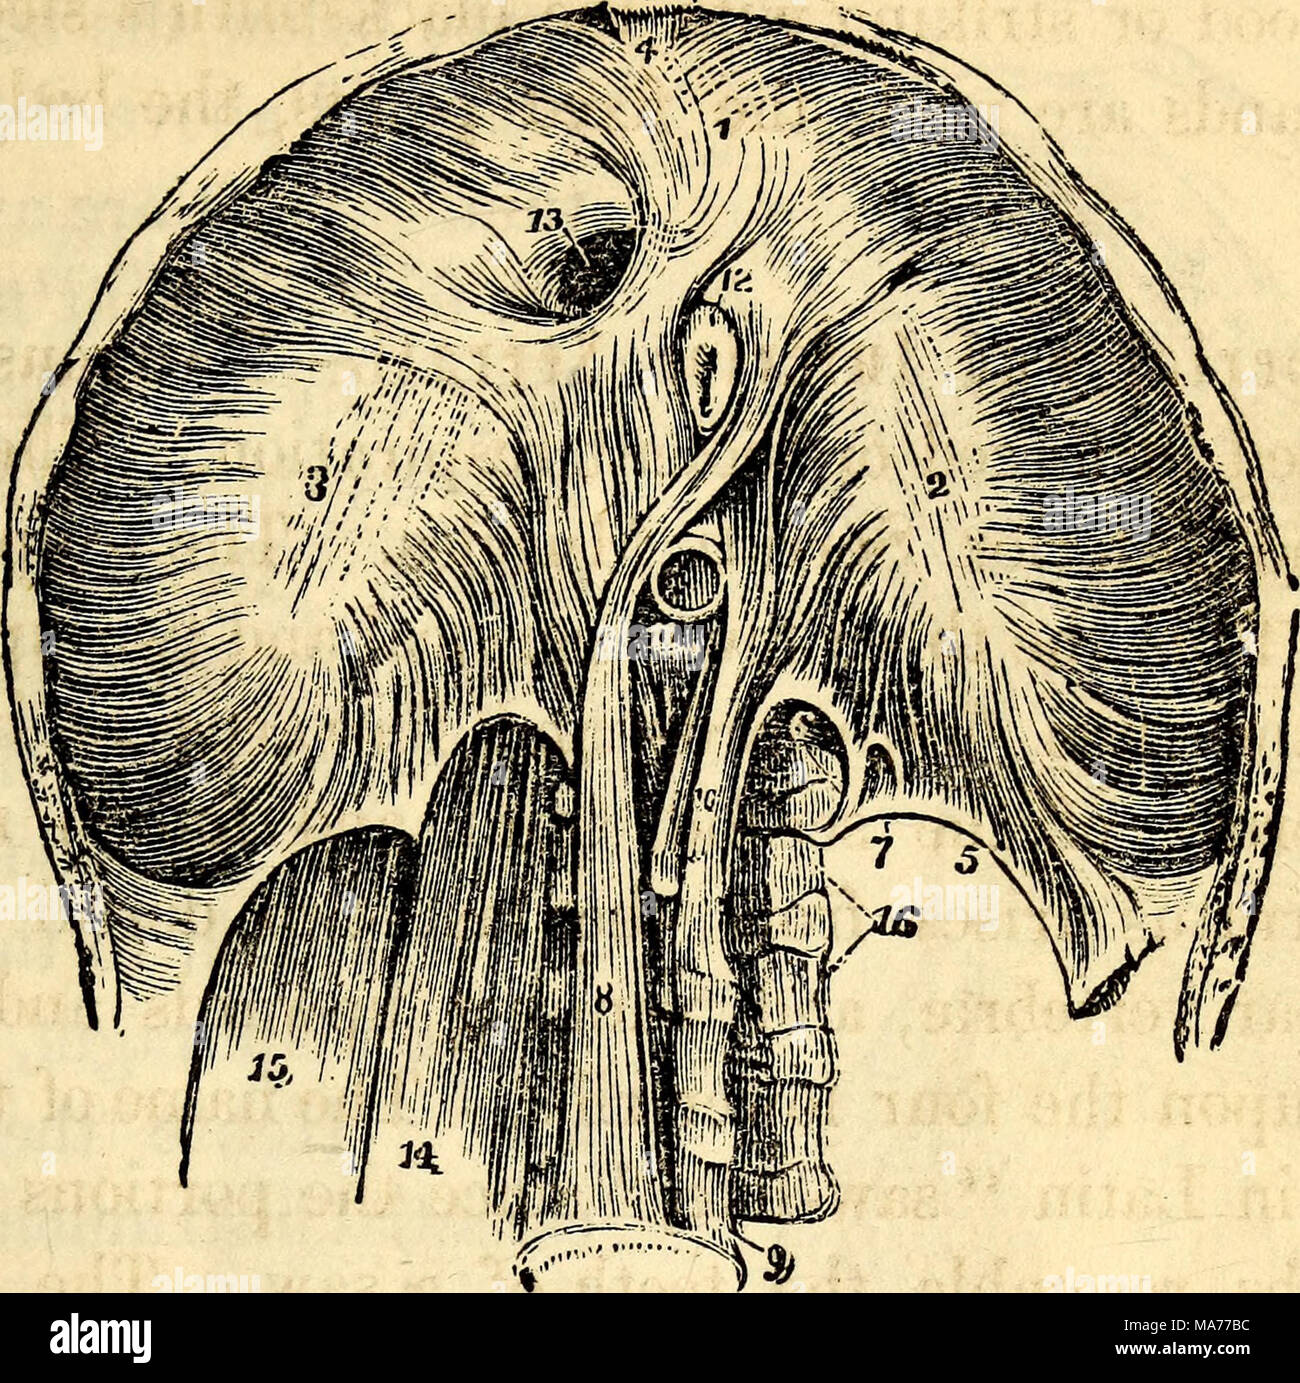 . Elementary anatomy and physiology : for colleges, academies, and other schools . A View of the Under Side of the Diaphragm. 1, 2, 3, The Greater Muscle of the Dia- phragm inserted into the Cordiform Tendon. 4, The small triangular space behind the Sternum, covered only by Serous Membrane, and through which Hernia sometimes pass. 5, Ligamentum Arcuatum of the Left Side. 6, Point of Origin of the Psoas Mag- nus. 7, A small Opening for the Lesser Splanchnic Nerve. 8, One of the Crura of the Diaphragm. 9, Fourth Lumbar Yertebra. 10, Another Cms or portion of the Lesser Muscle of the Diaphragm. 1 Stock Photo